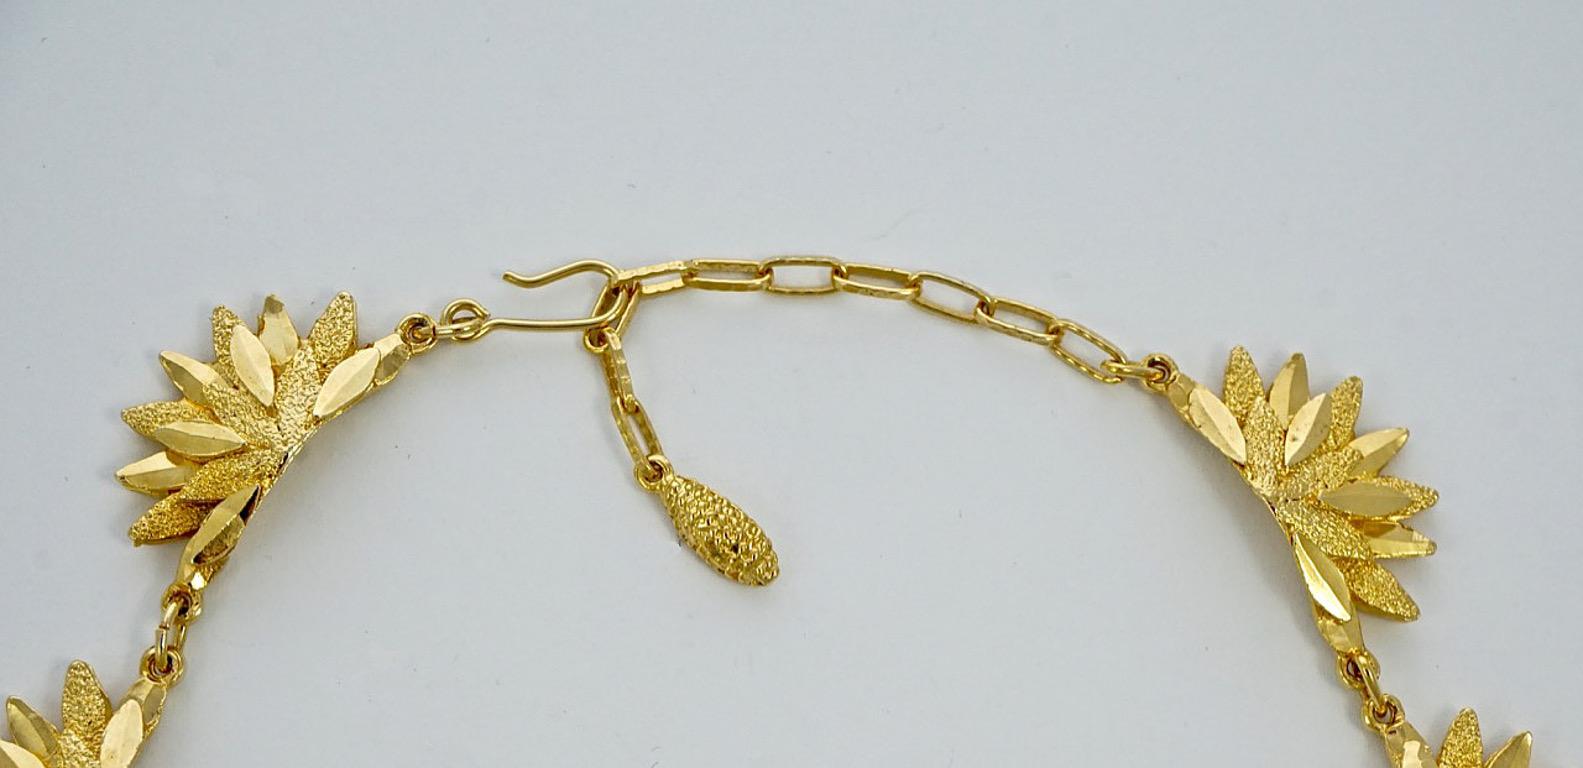 Gold Plated Brushed and Shiny Petal Link Necklace circa 1970s For Sale 1